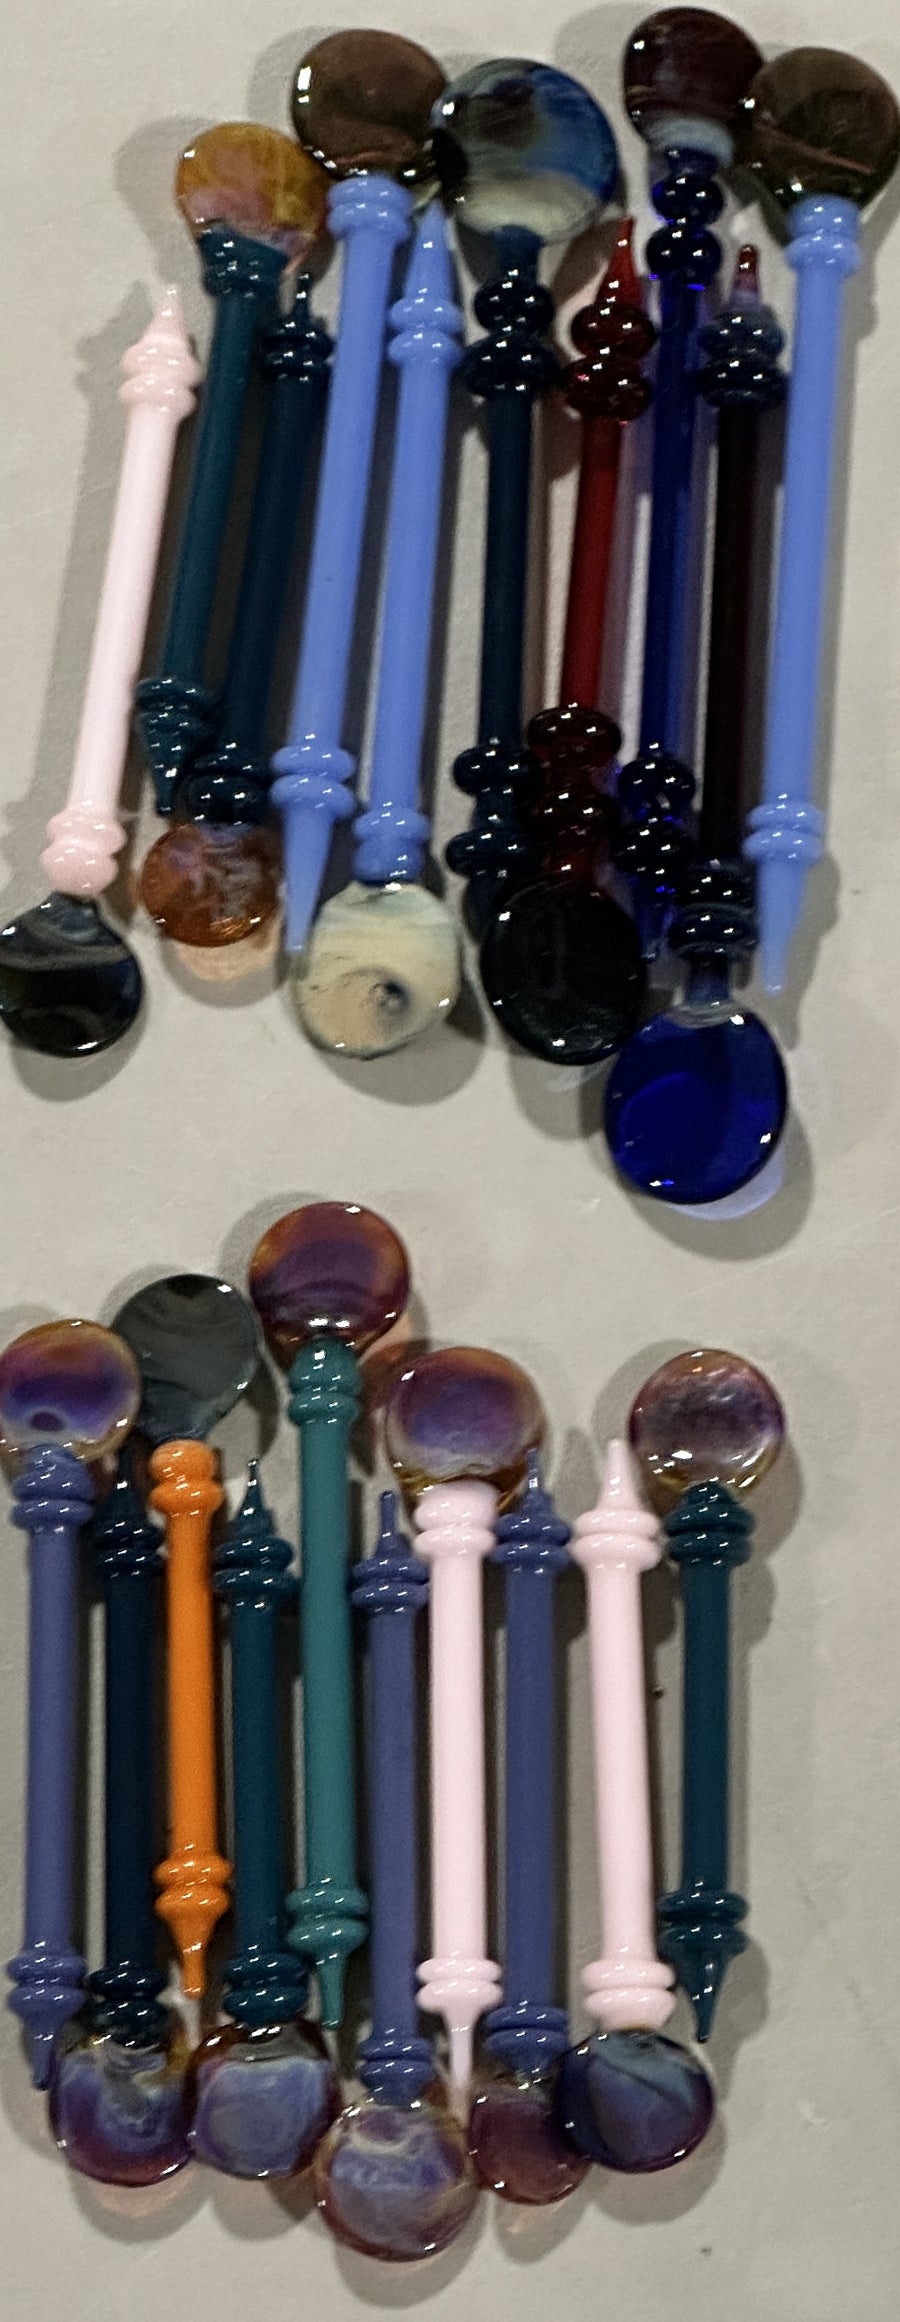 OOS - Color Blended Dabbers (10pack)